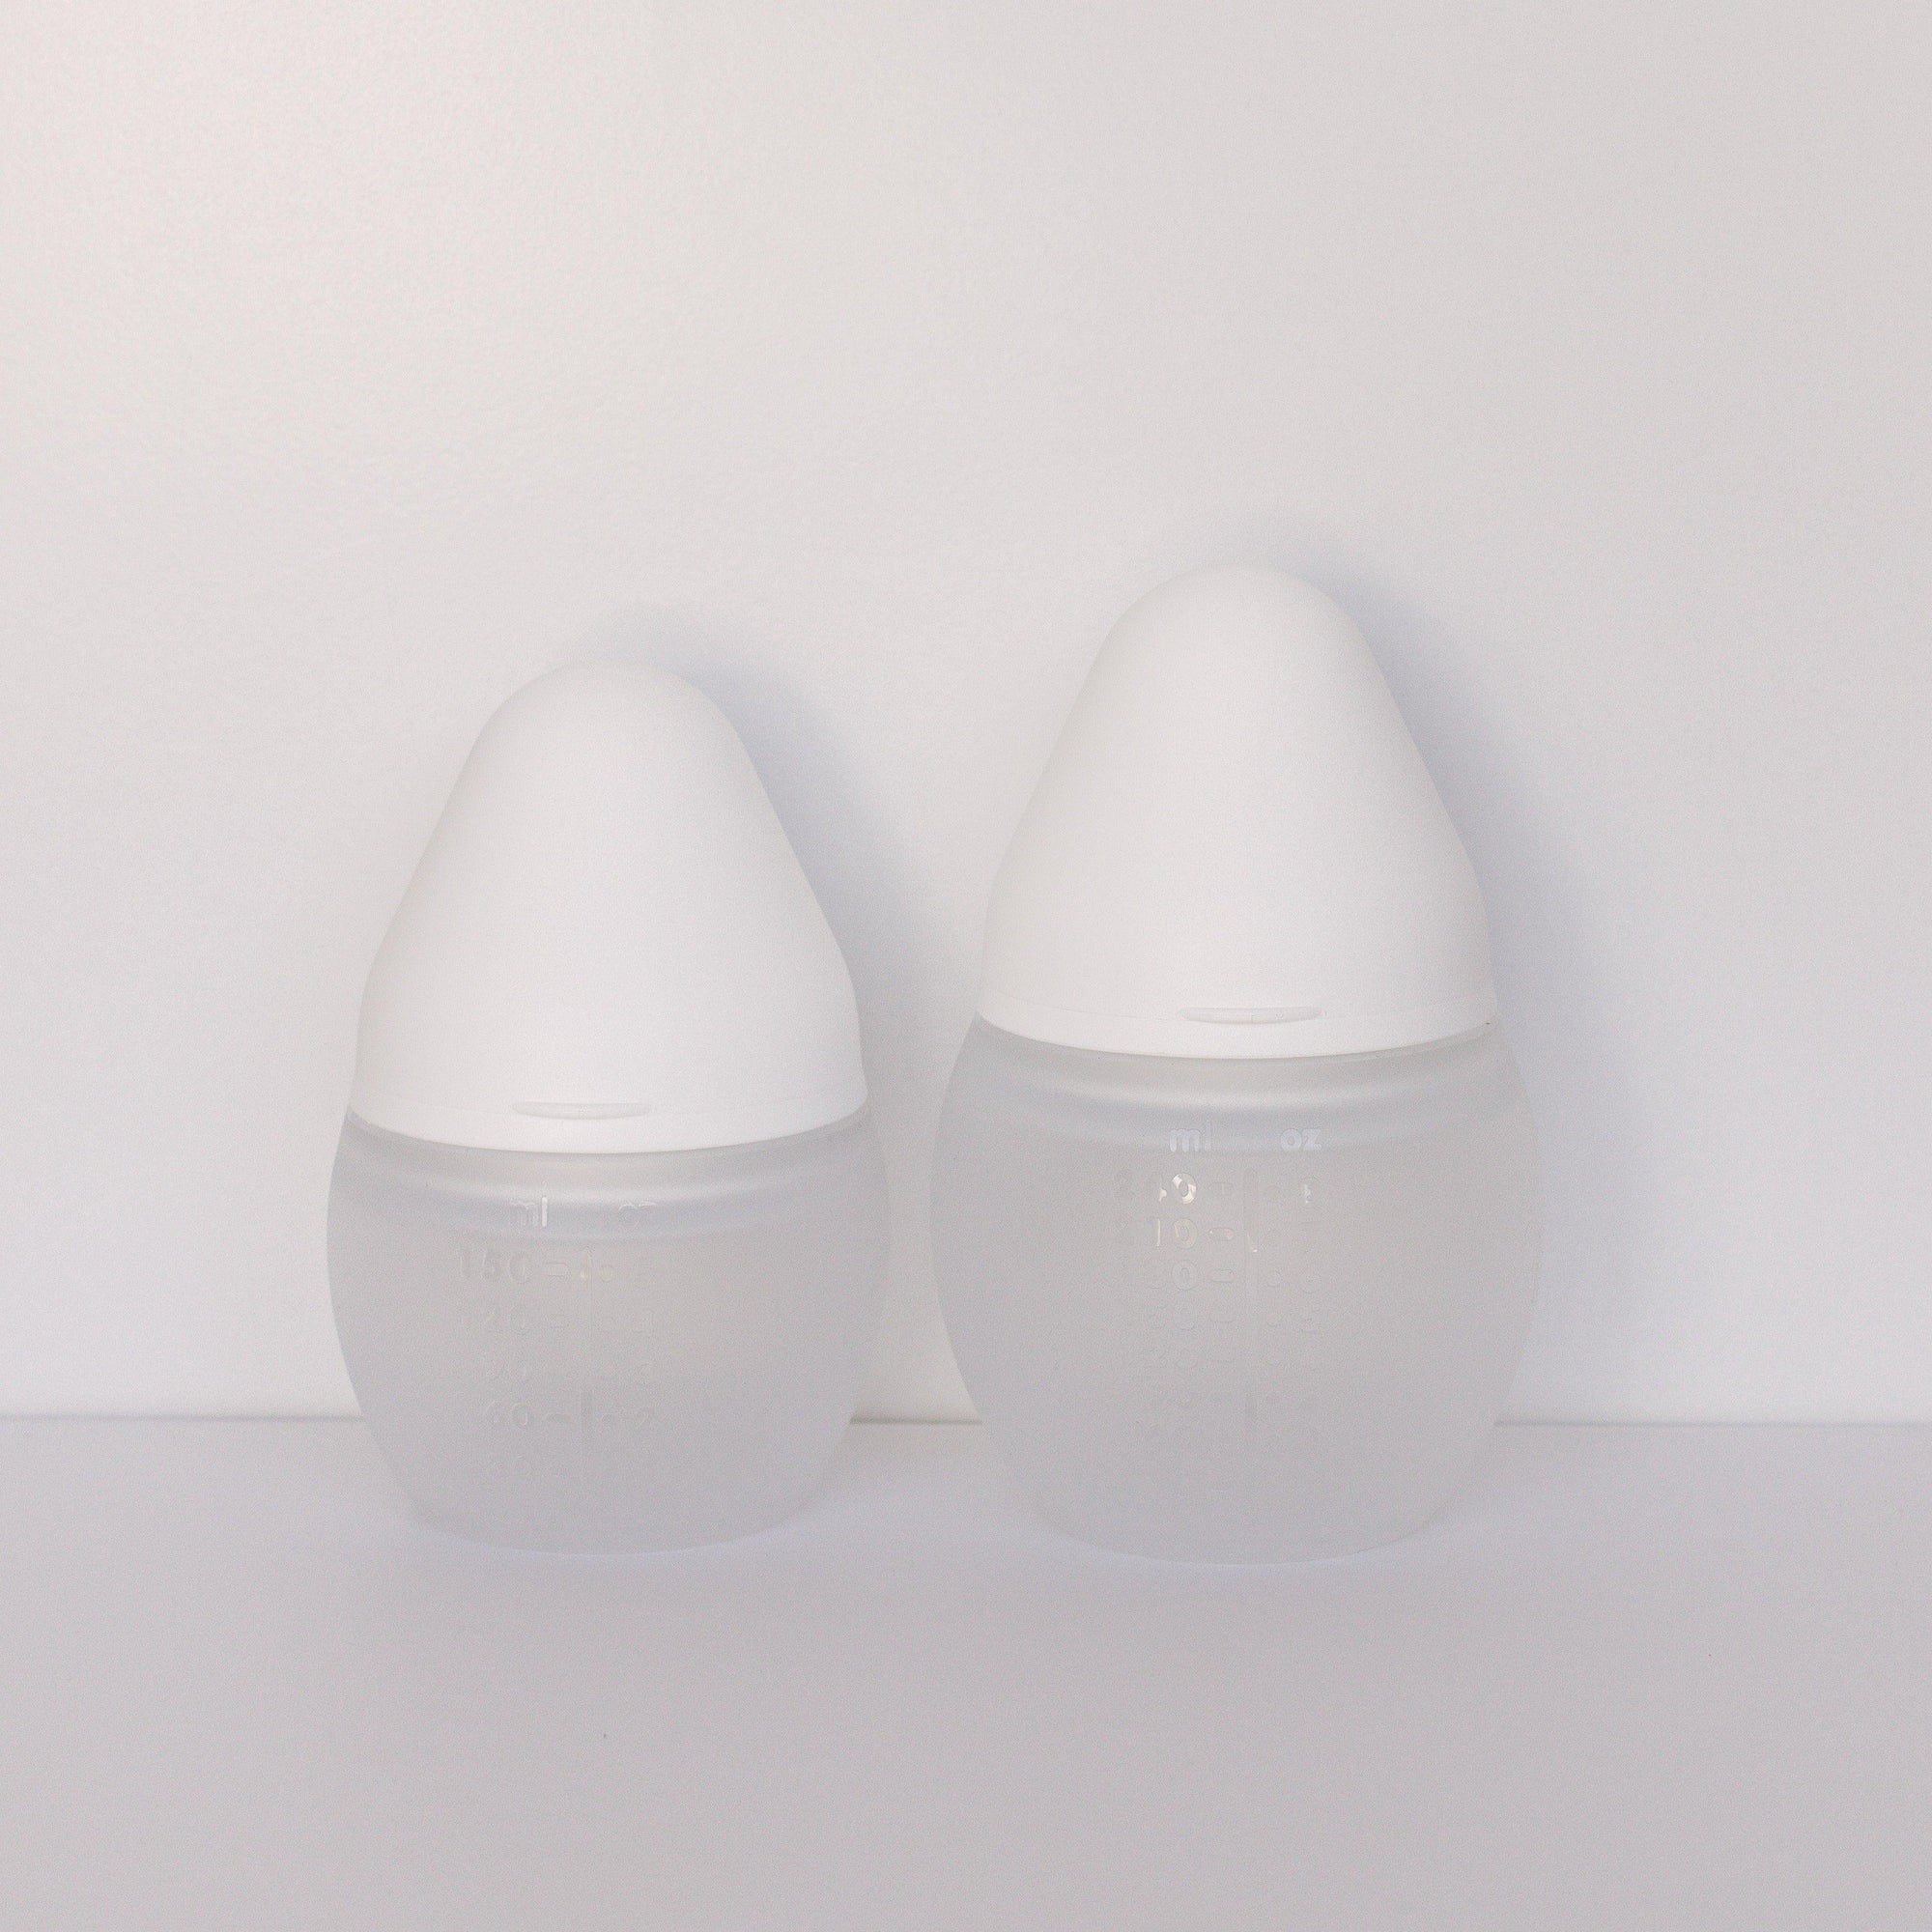 Two milk BibRond bottles by Elhée France standing against a white surface.